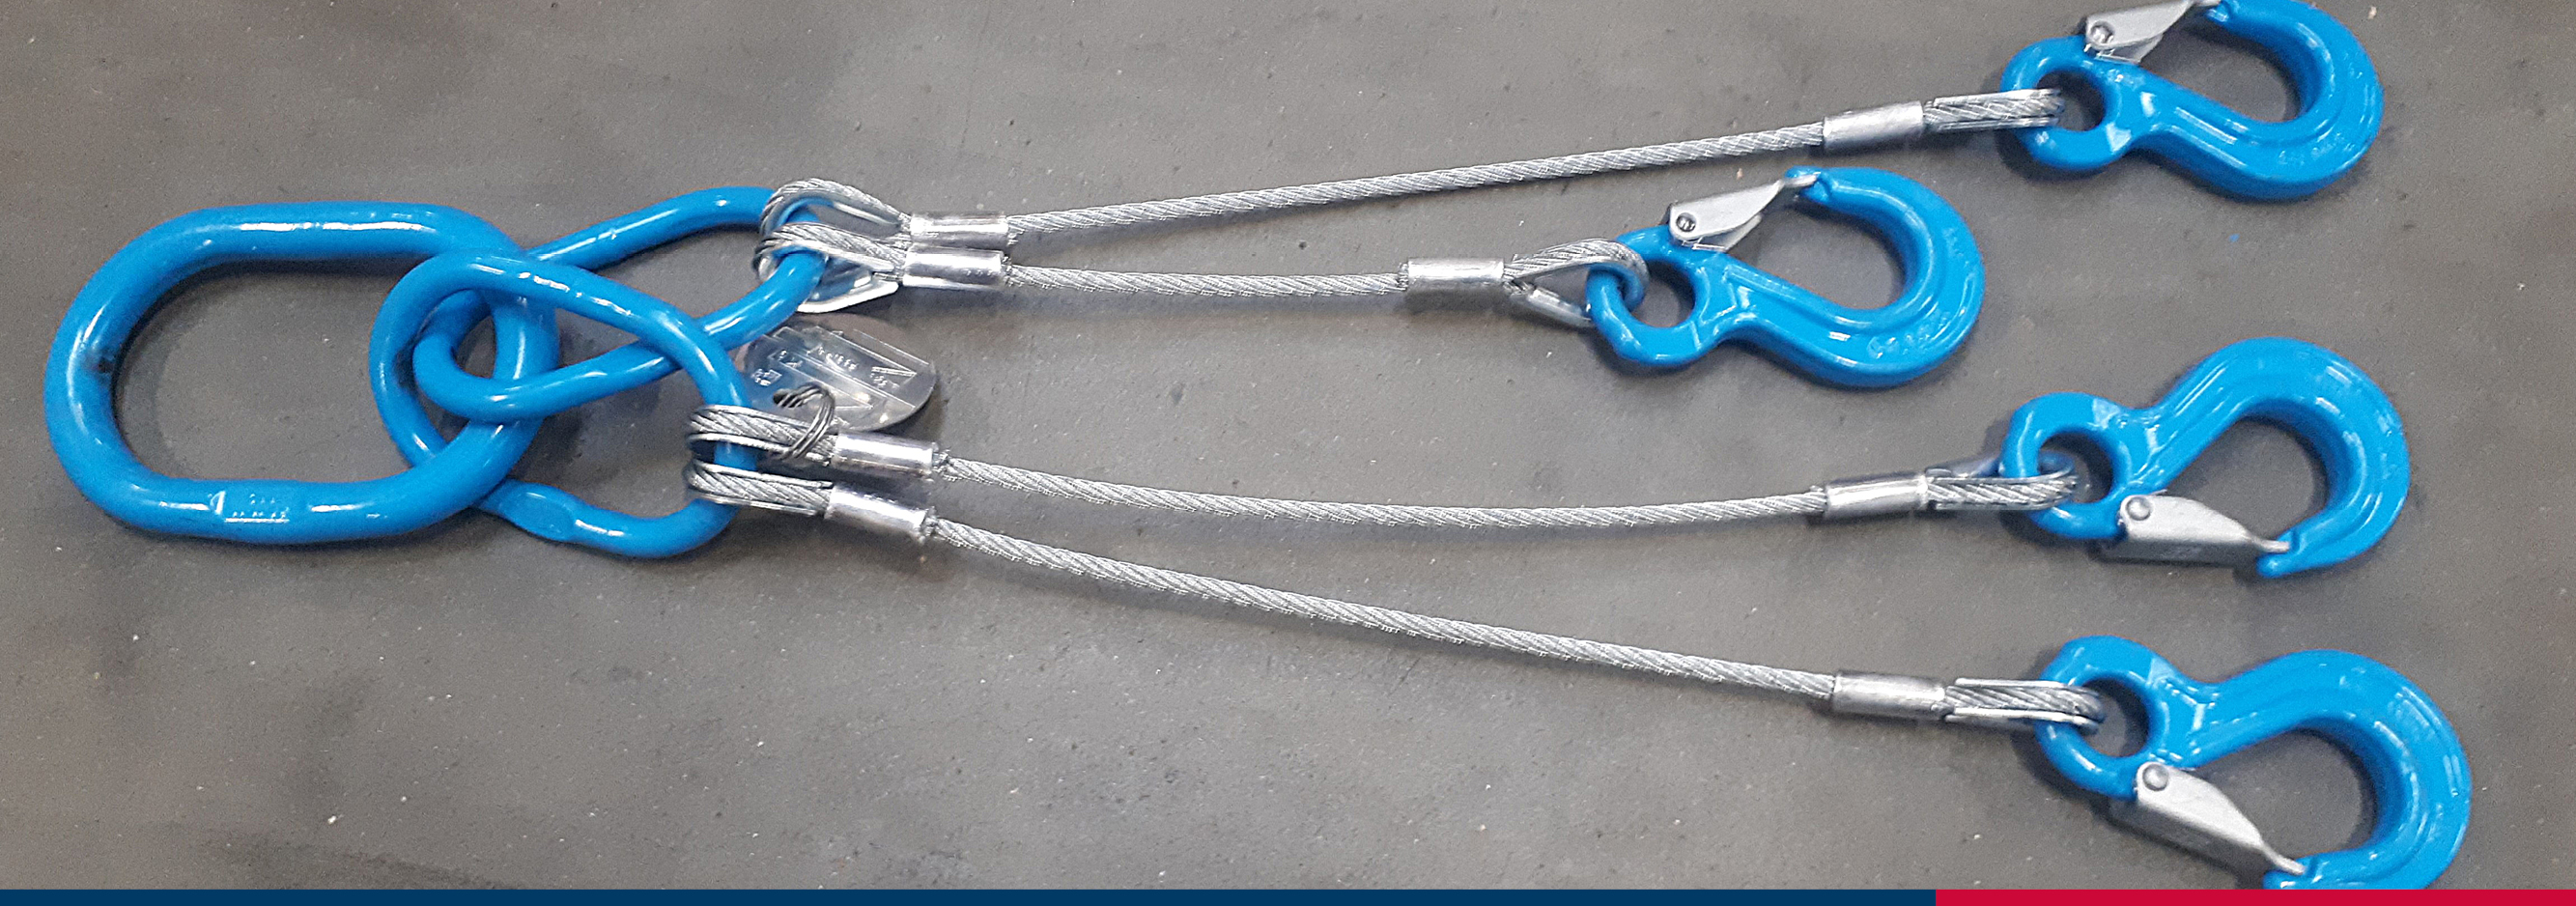 4-part wire rope sling | © CERTEX Danmark A/S